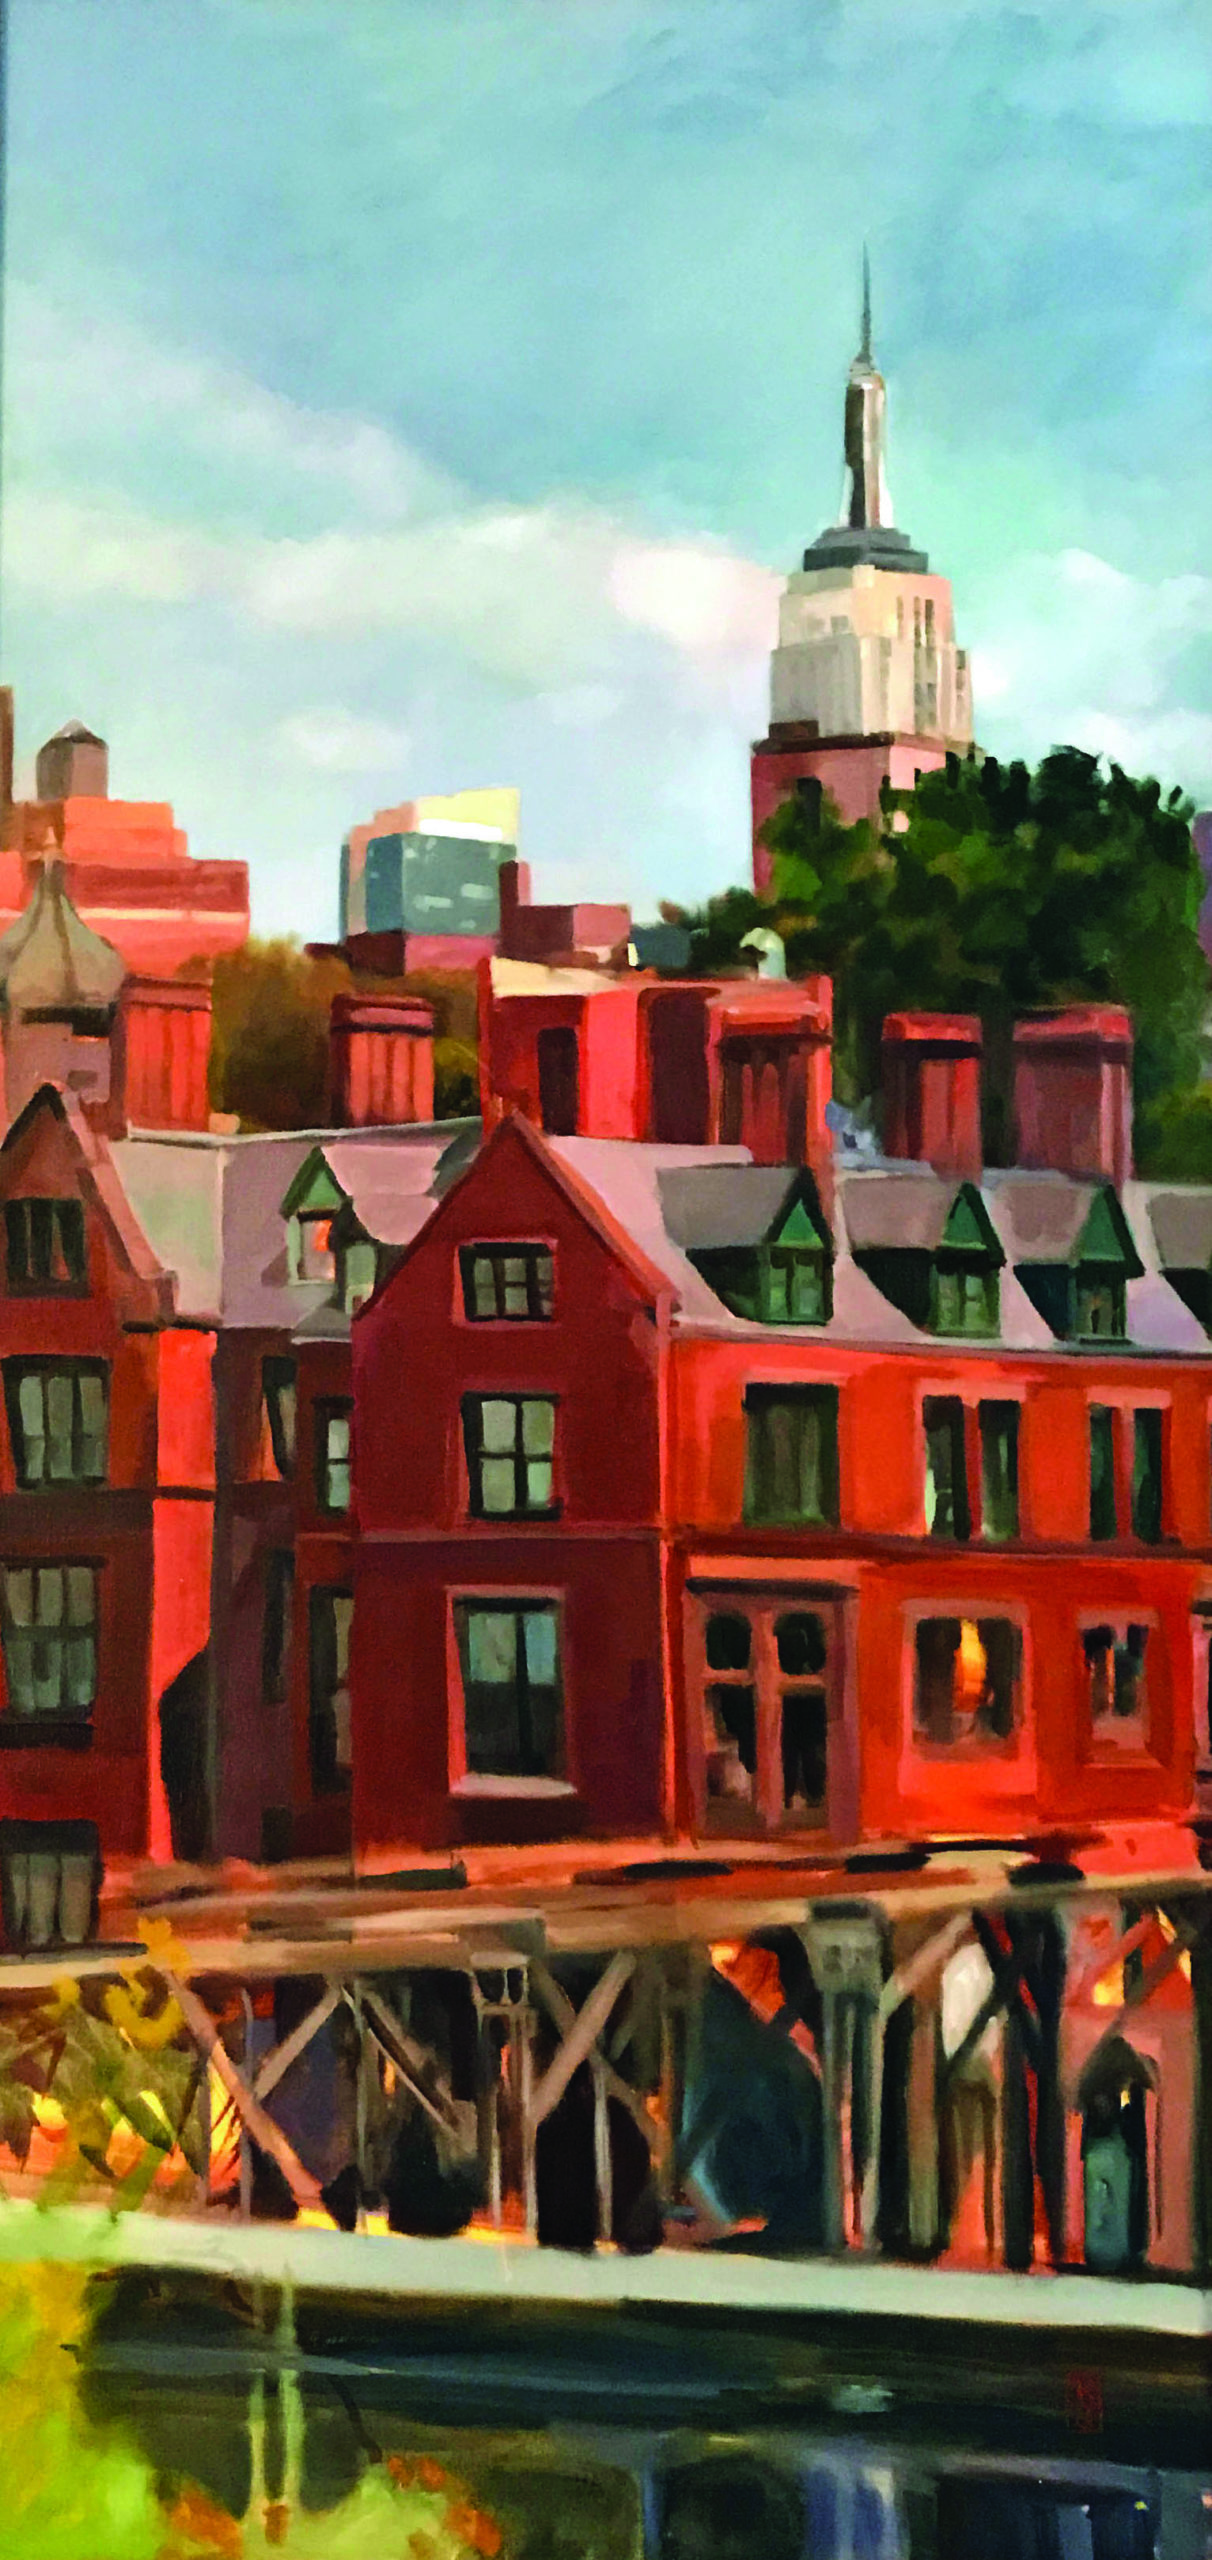 Katherine Jennings, "View From the Highline," 2018, oil, 48 x 24 in., Available from artist, Studio from plein air study